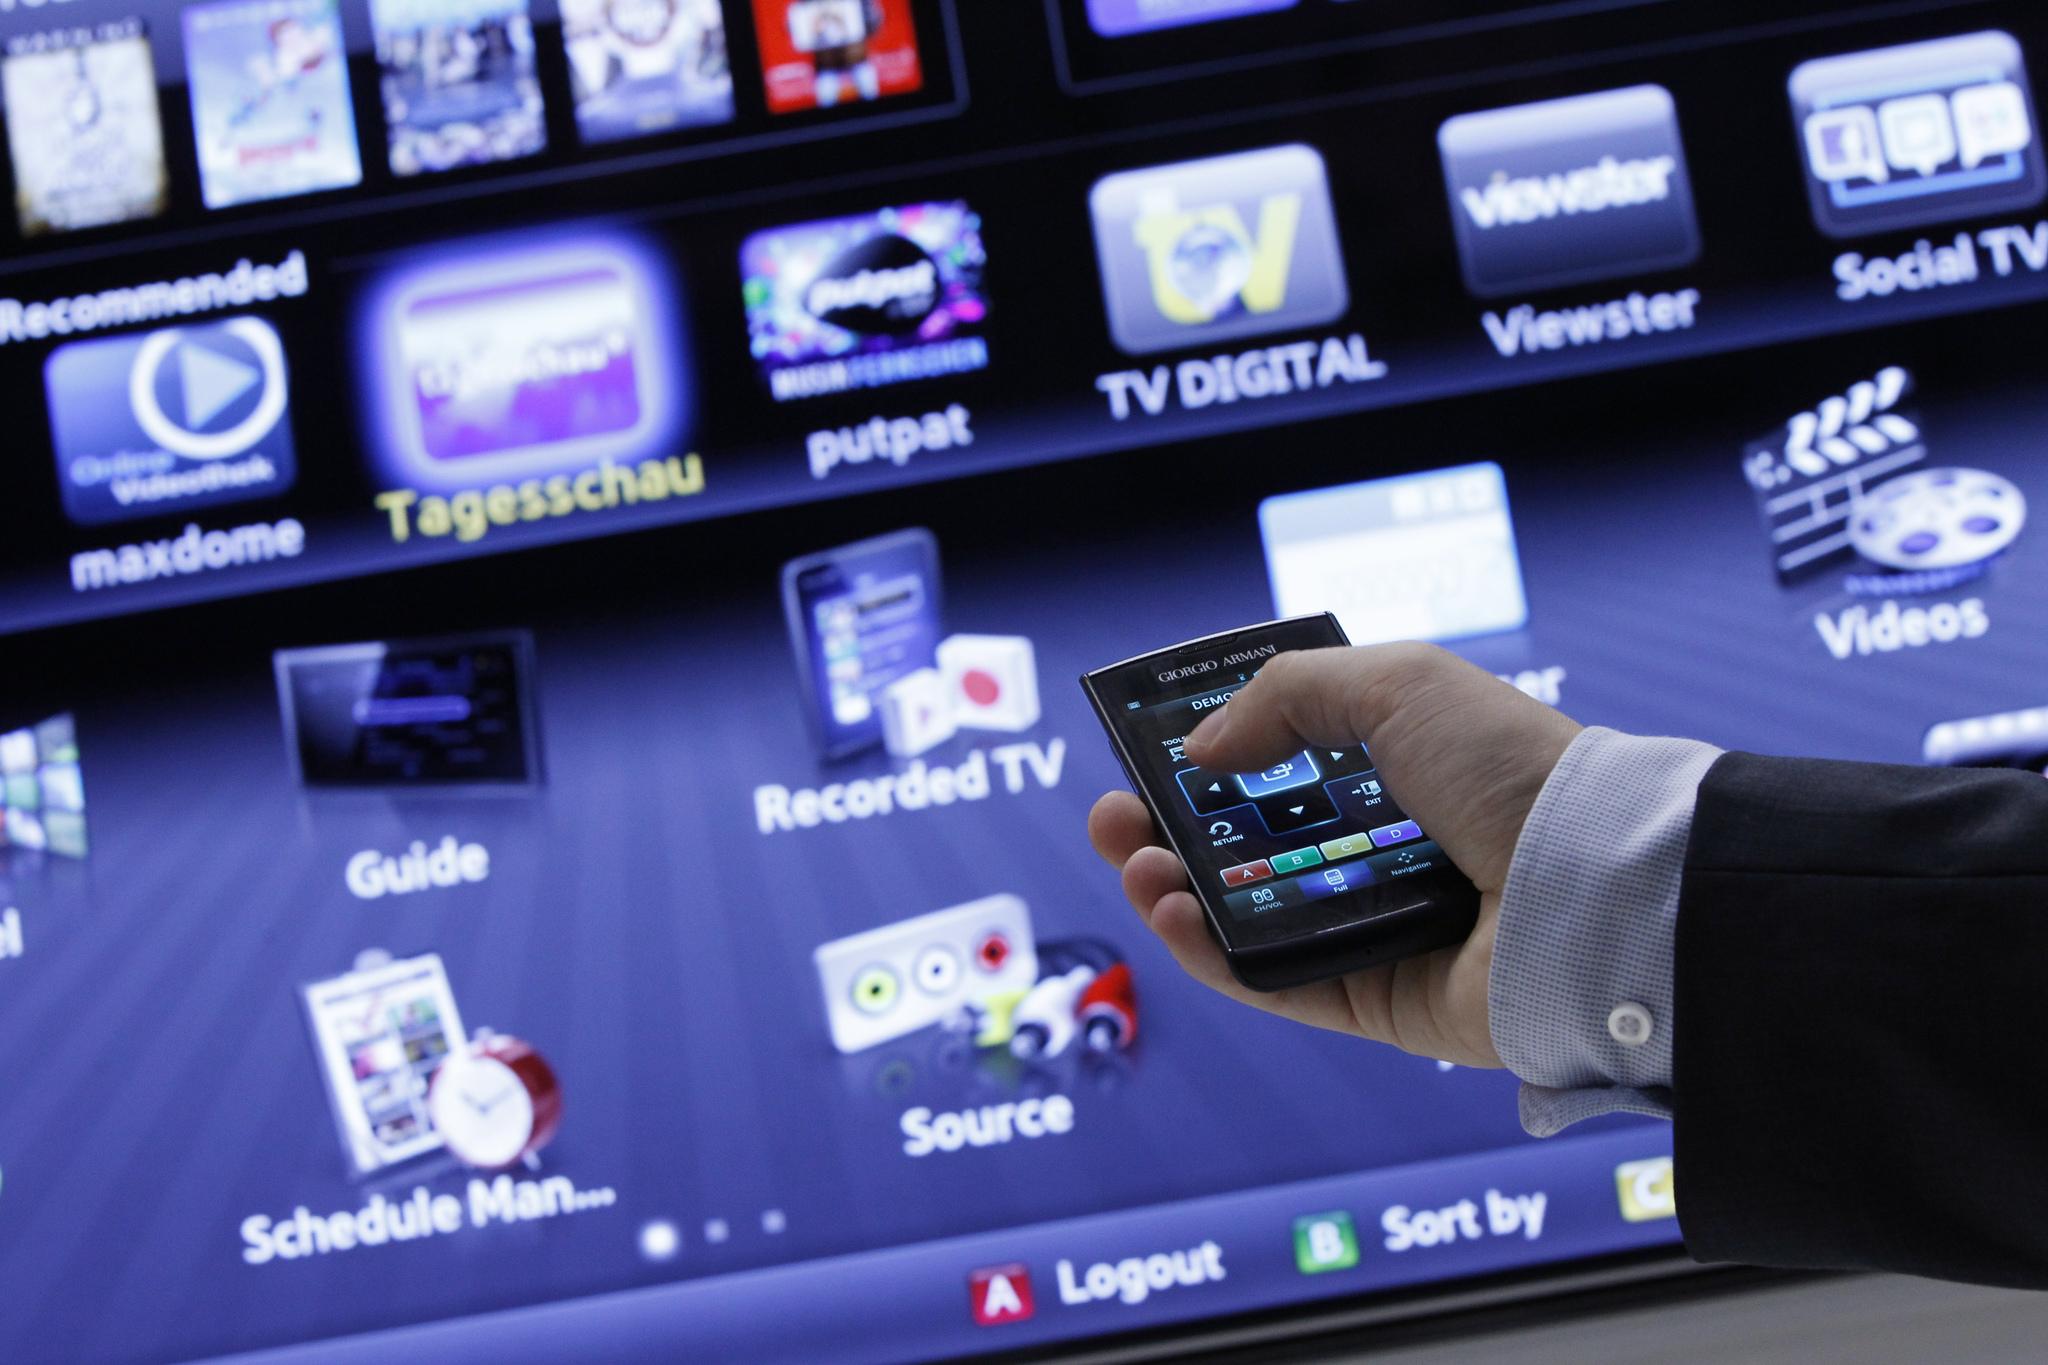 An exhibitor demonstrates a Samsung Smart TV at the IFA consumer electronics fair in Berlin, August 31, 2011. 